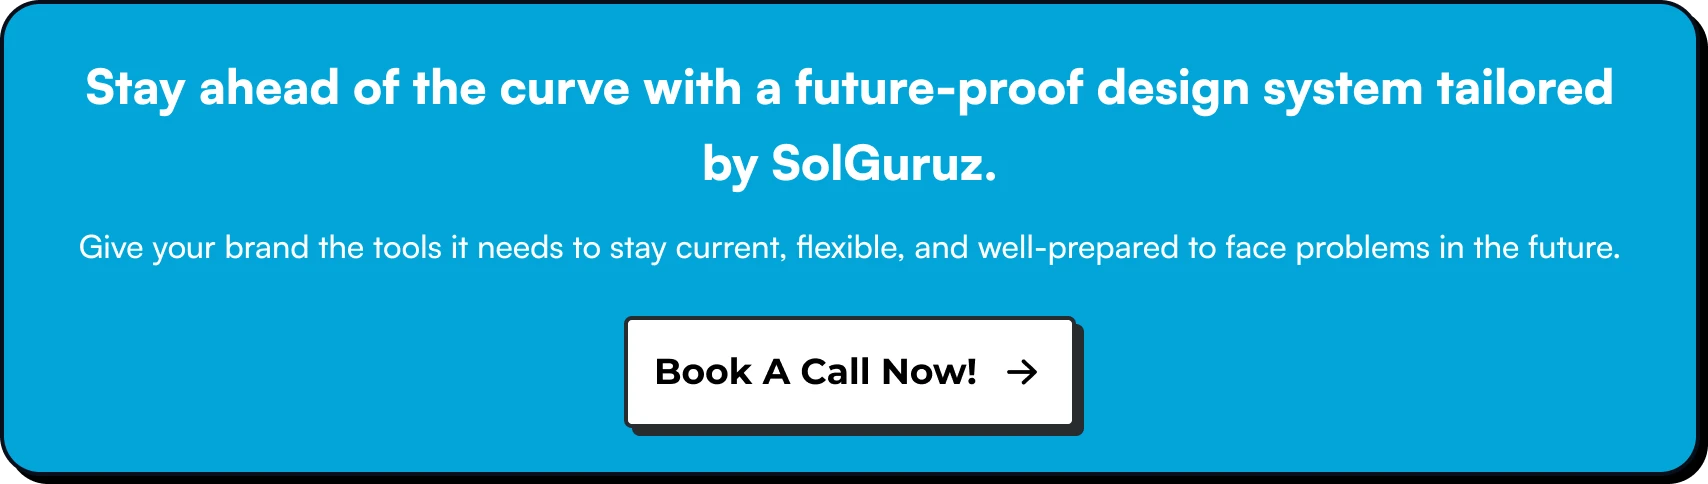 Stay ahead of the curve with a future-proof design system tailored by SolGuruz